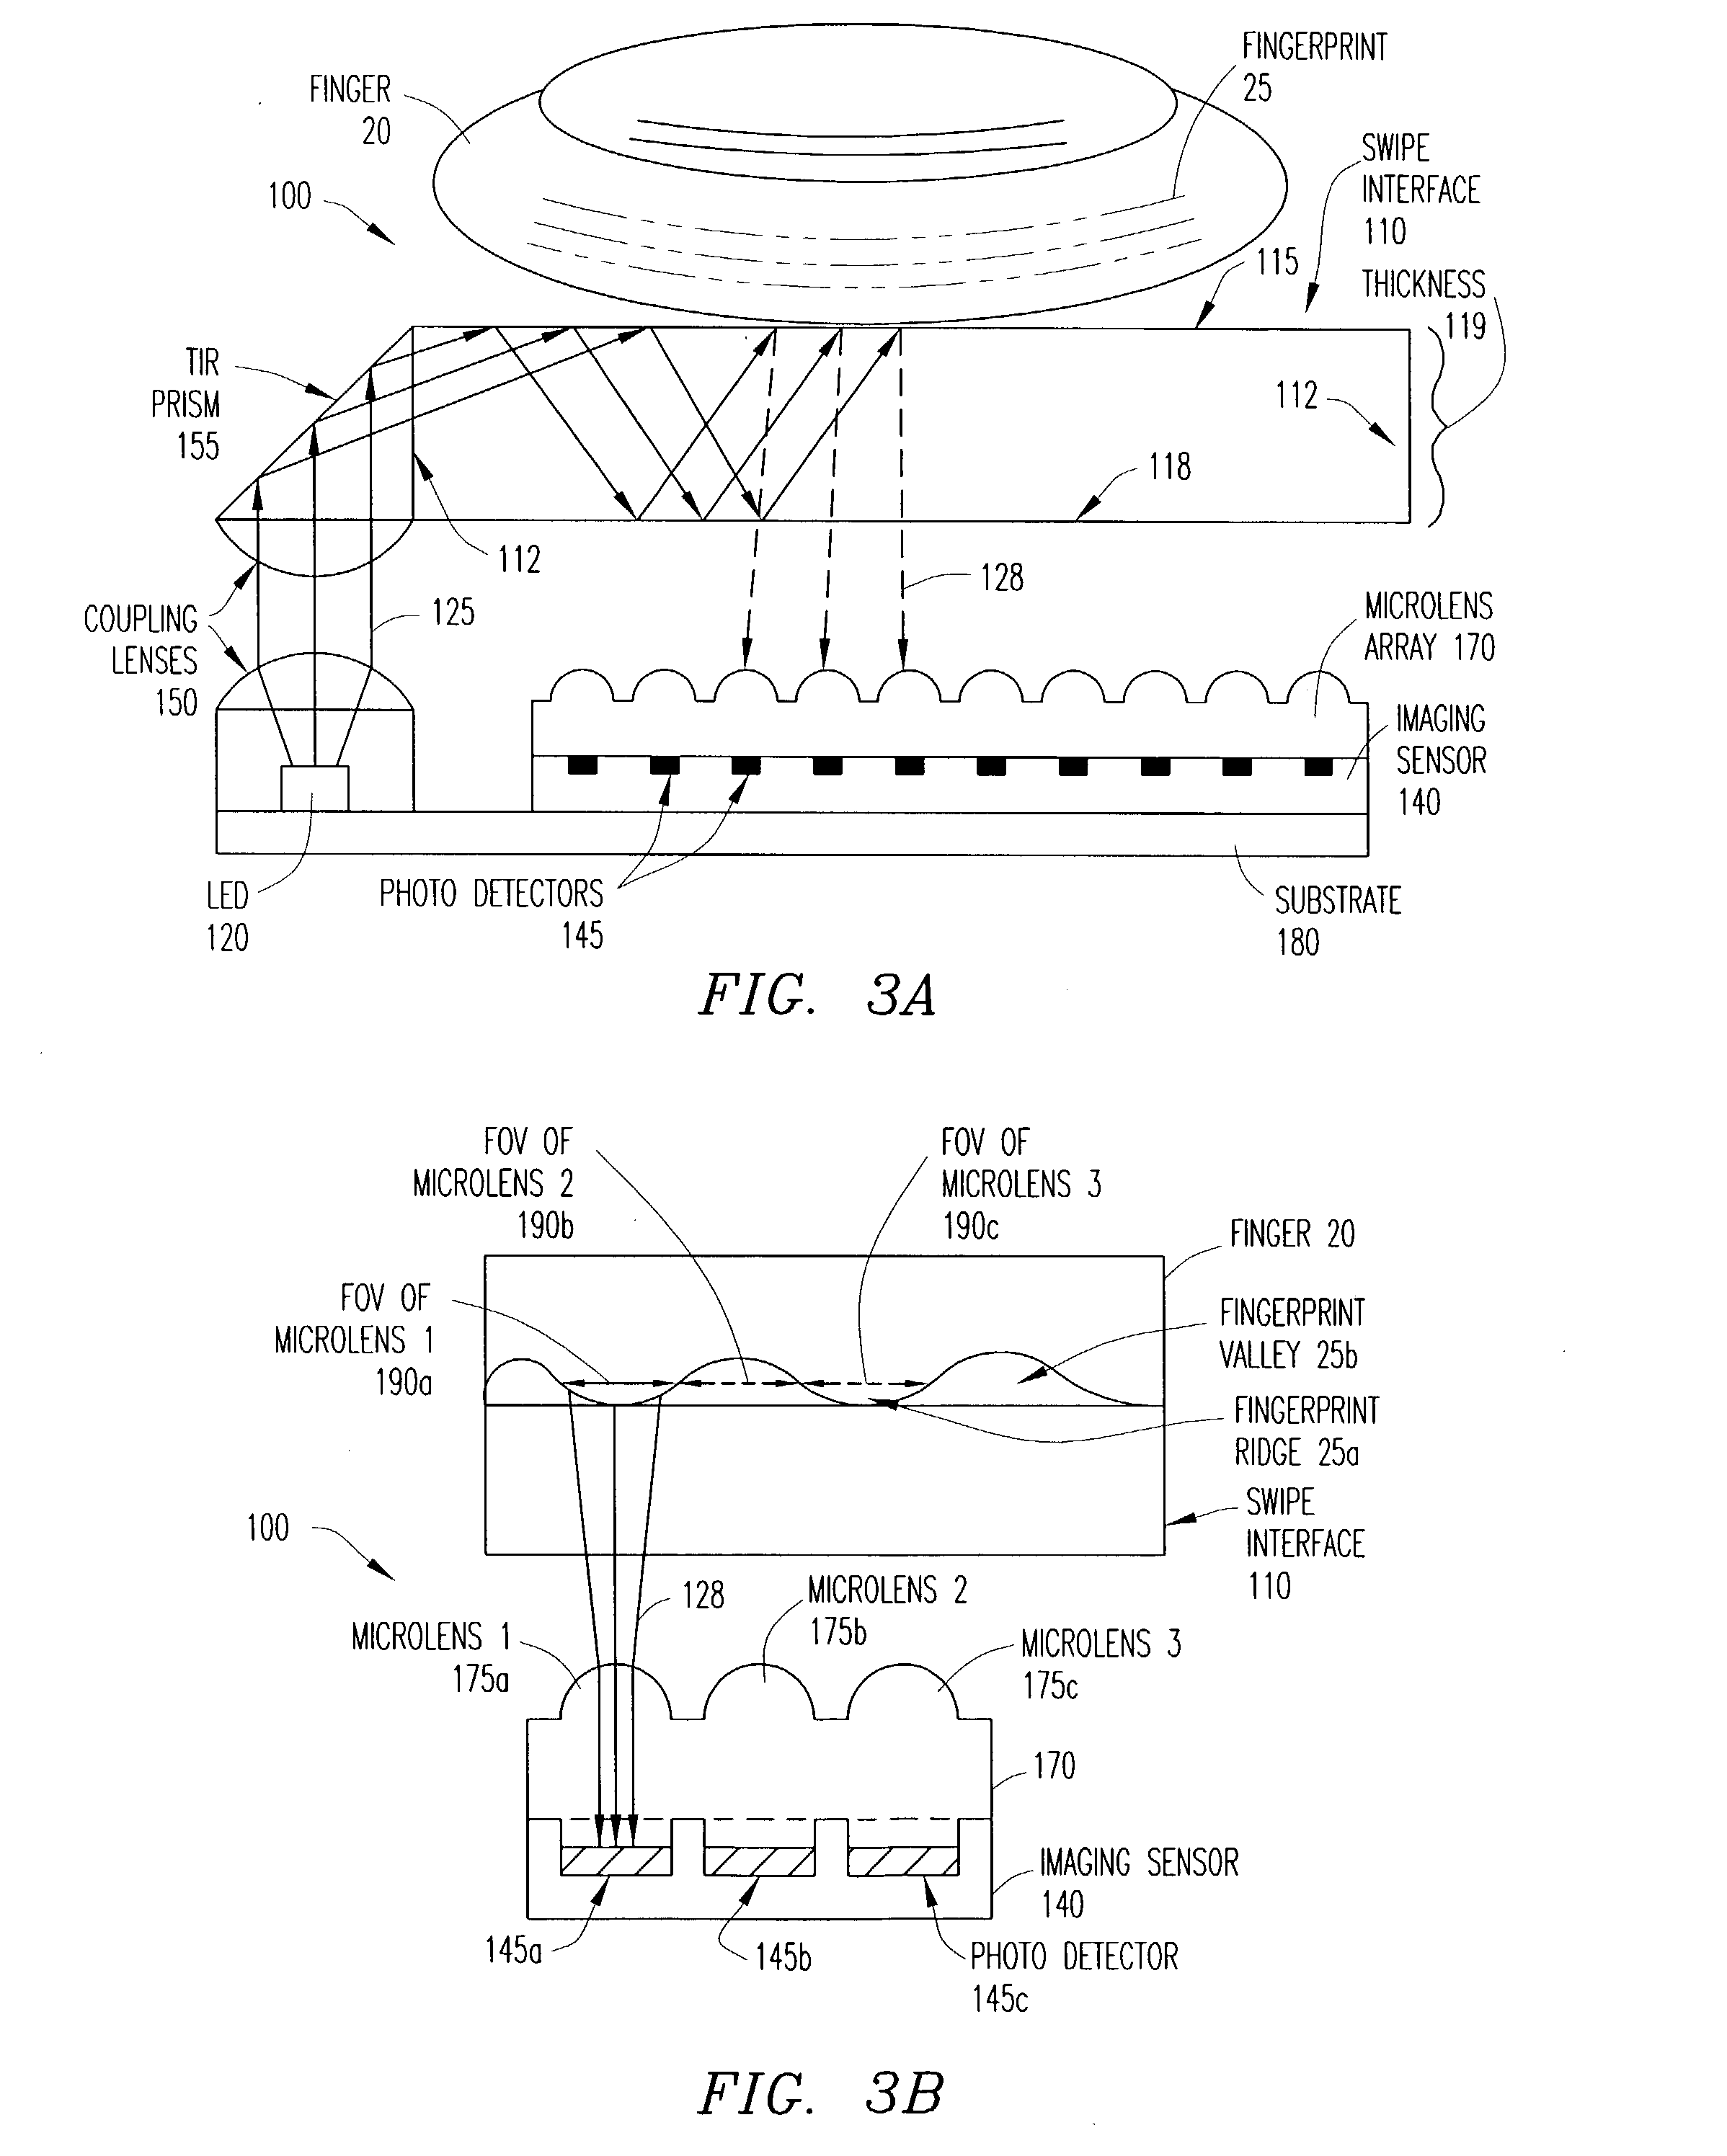 System and method for time-space multiplexing in finger-imaging applications